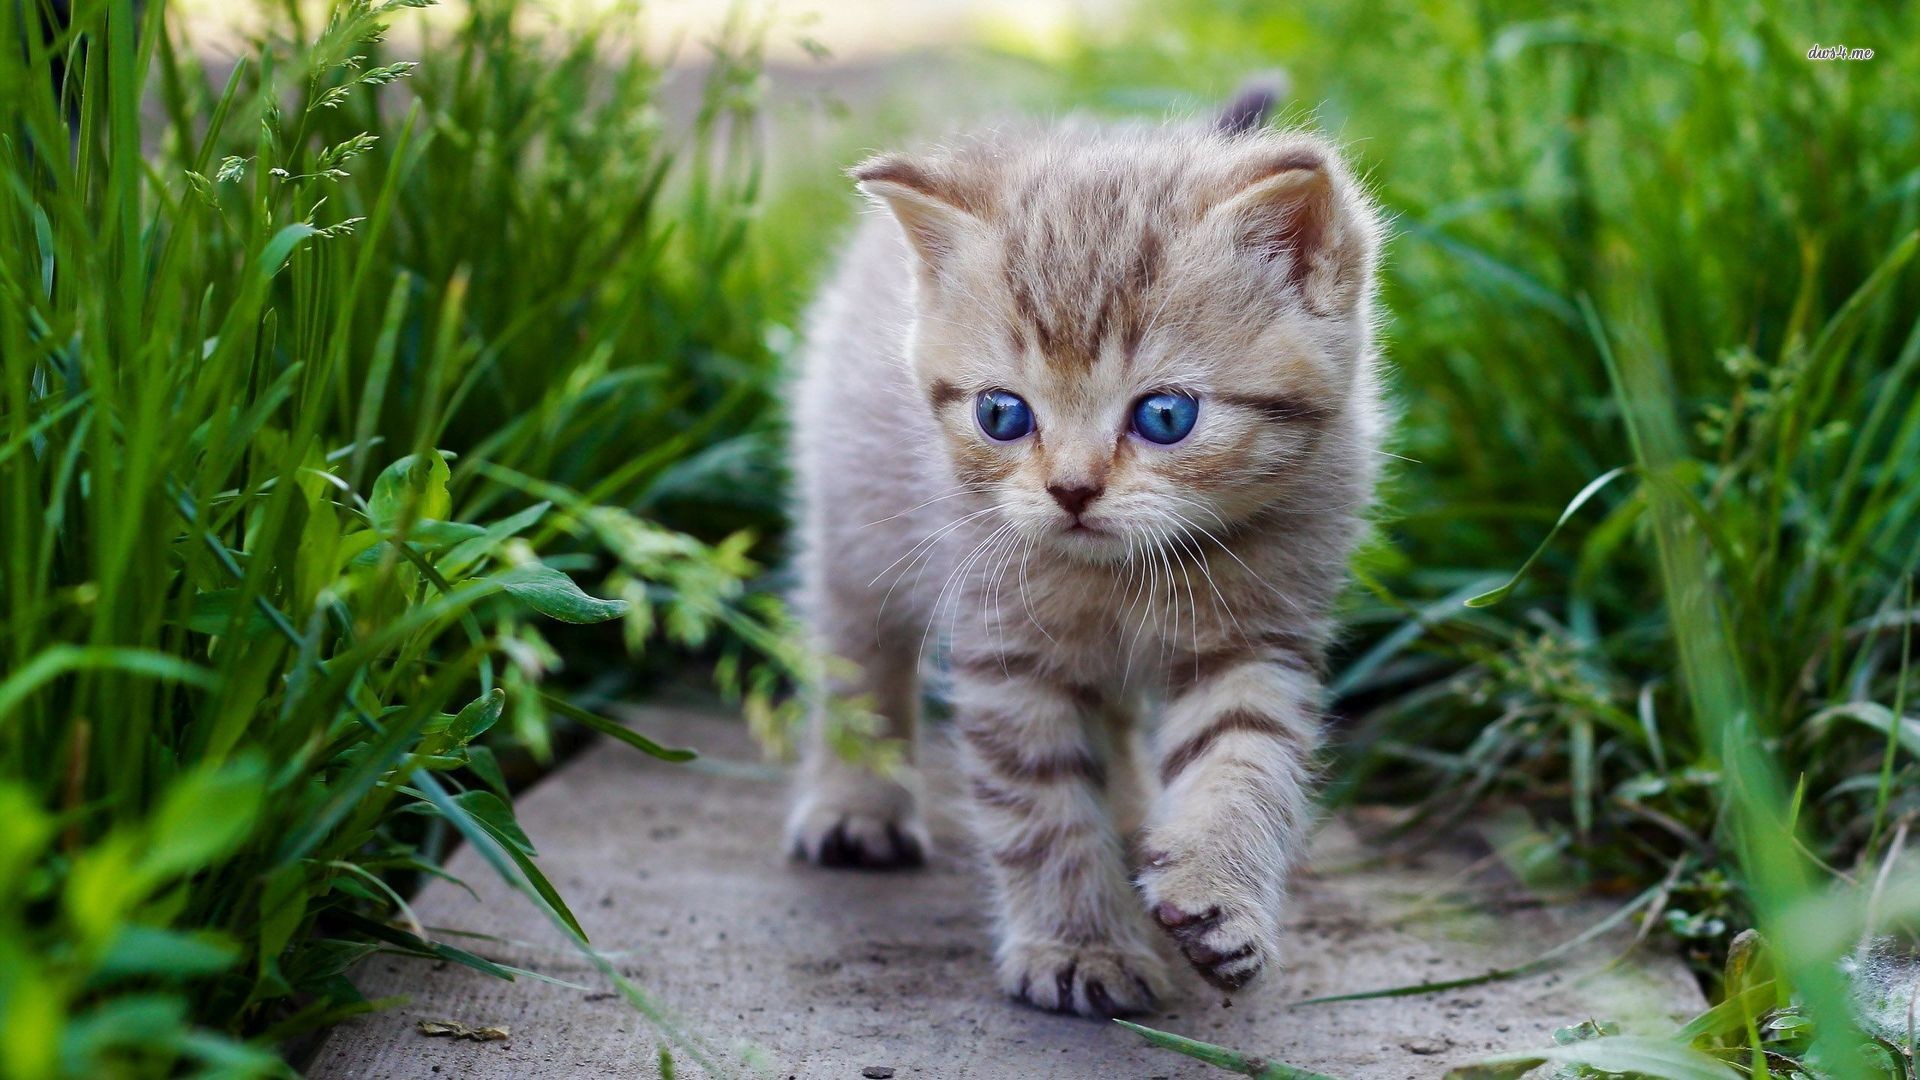 1920x1080 Gallery for Cute Baby Cats. Image for 27967 cute baby cat animal wallpaper